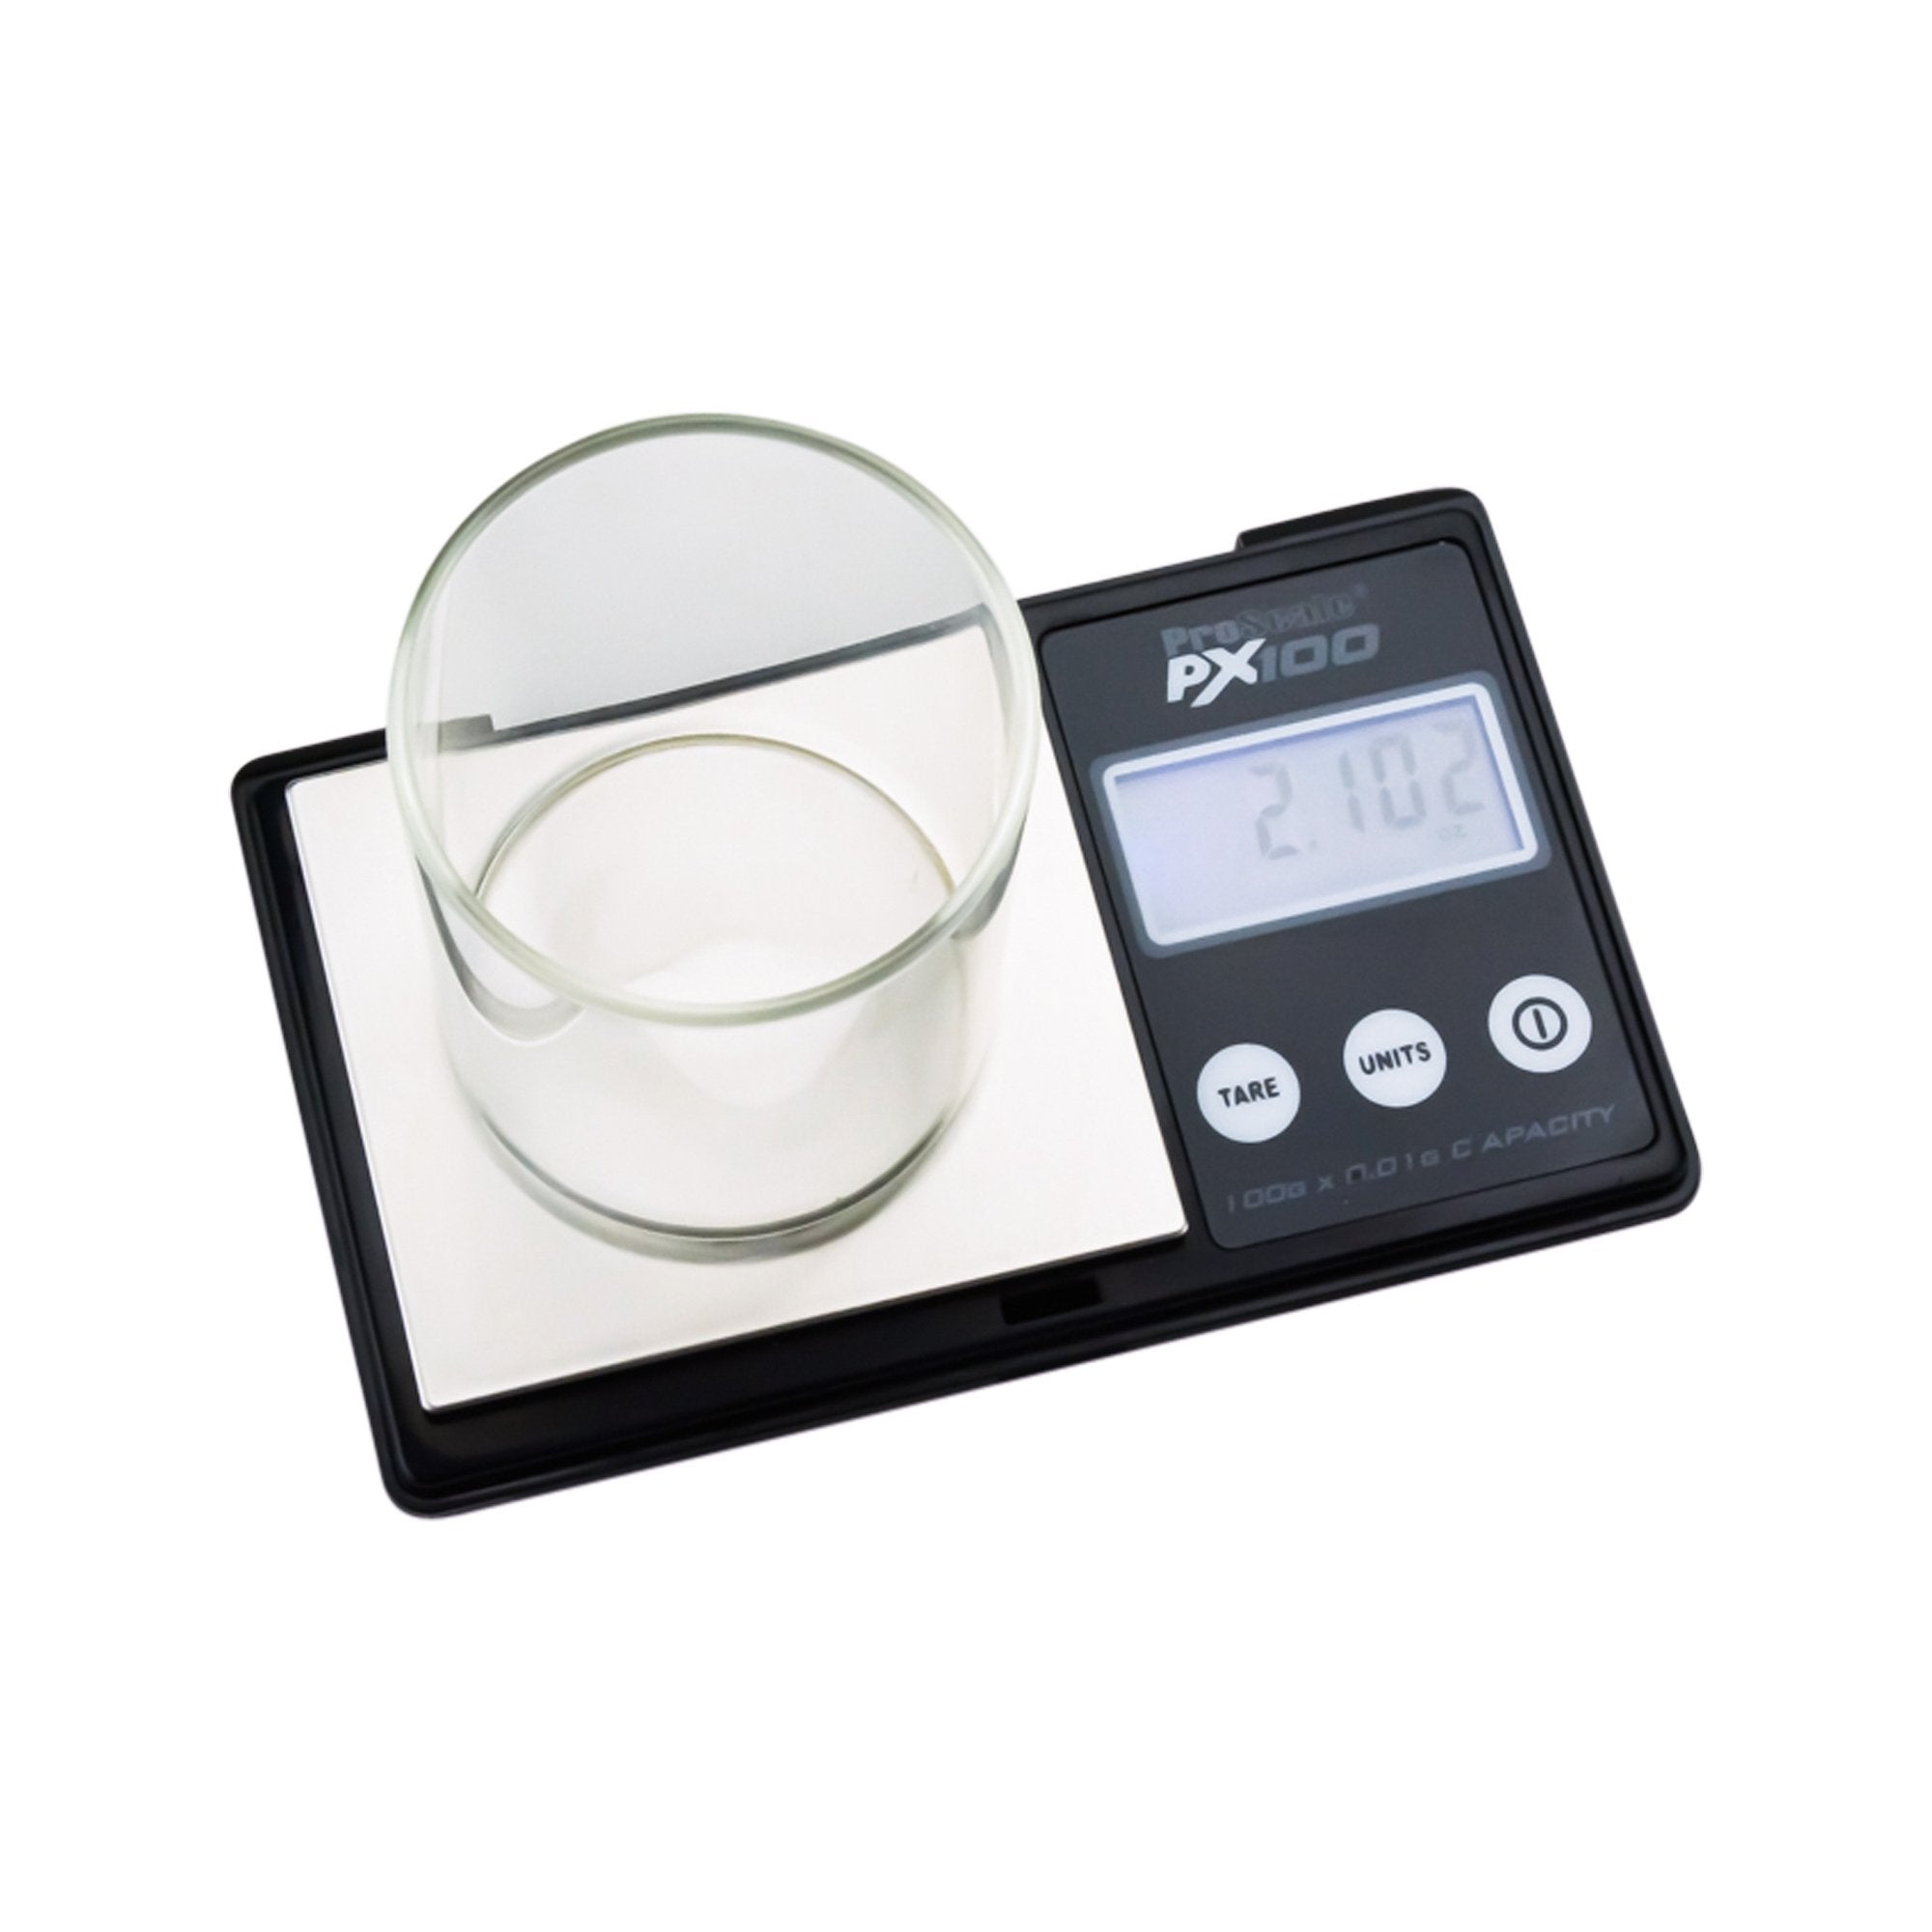 PRO SCALE | PX100 Digital Scale | 100g Capacity - 0.01g Readability - 2